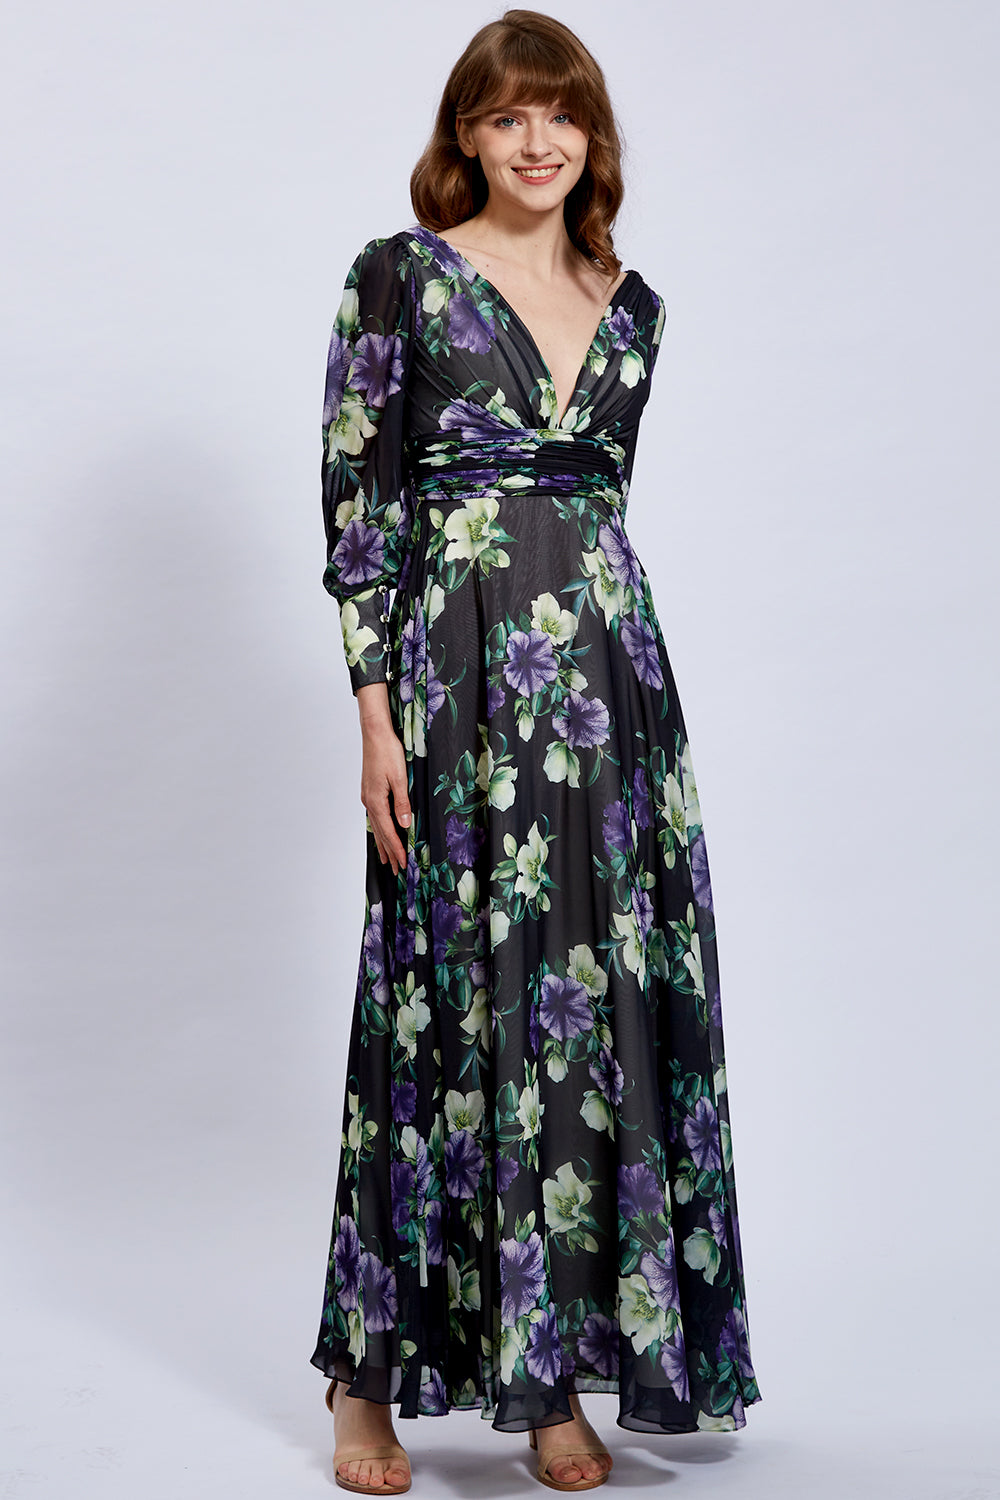 Long Puff Sleeves V Neck Floral Black Evening Gown